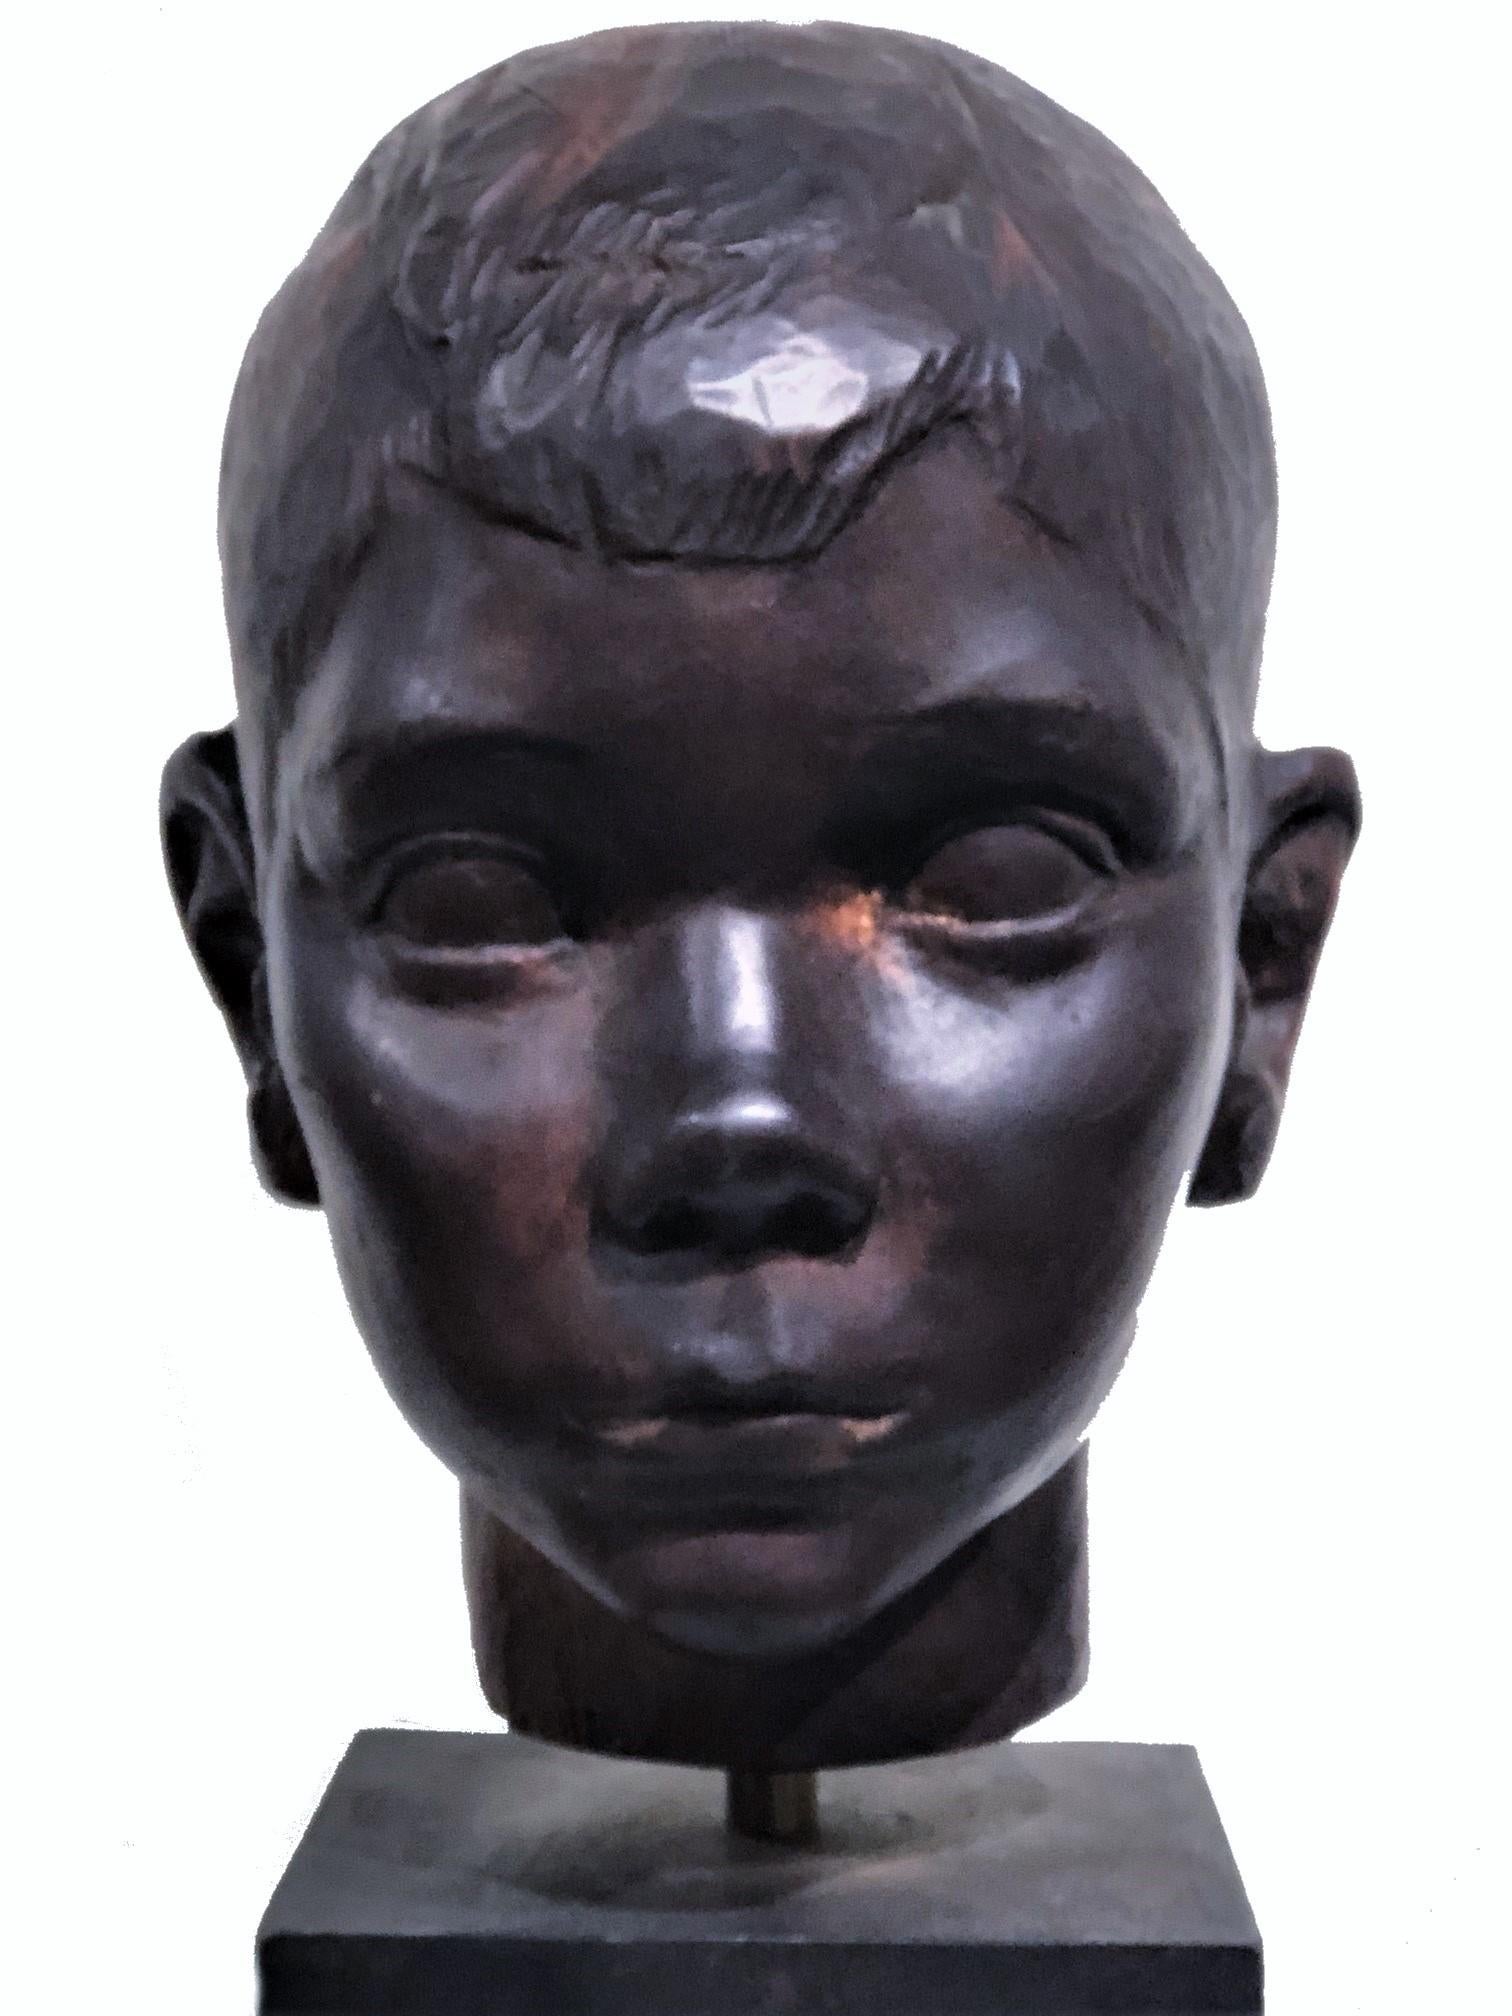 ABOUT SCULPTURE
This wonderful sculptural and portrait work was certainly created by a master sculptor, although not signed by the author. The face of this typical all-American boy, as if familiar to everyone, is distinguished by a special emotional